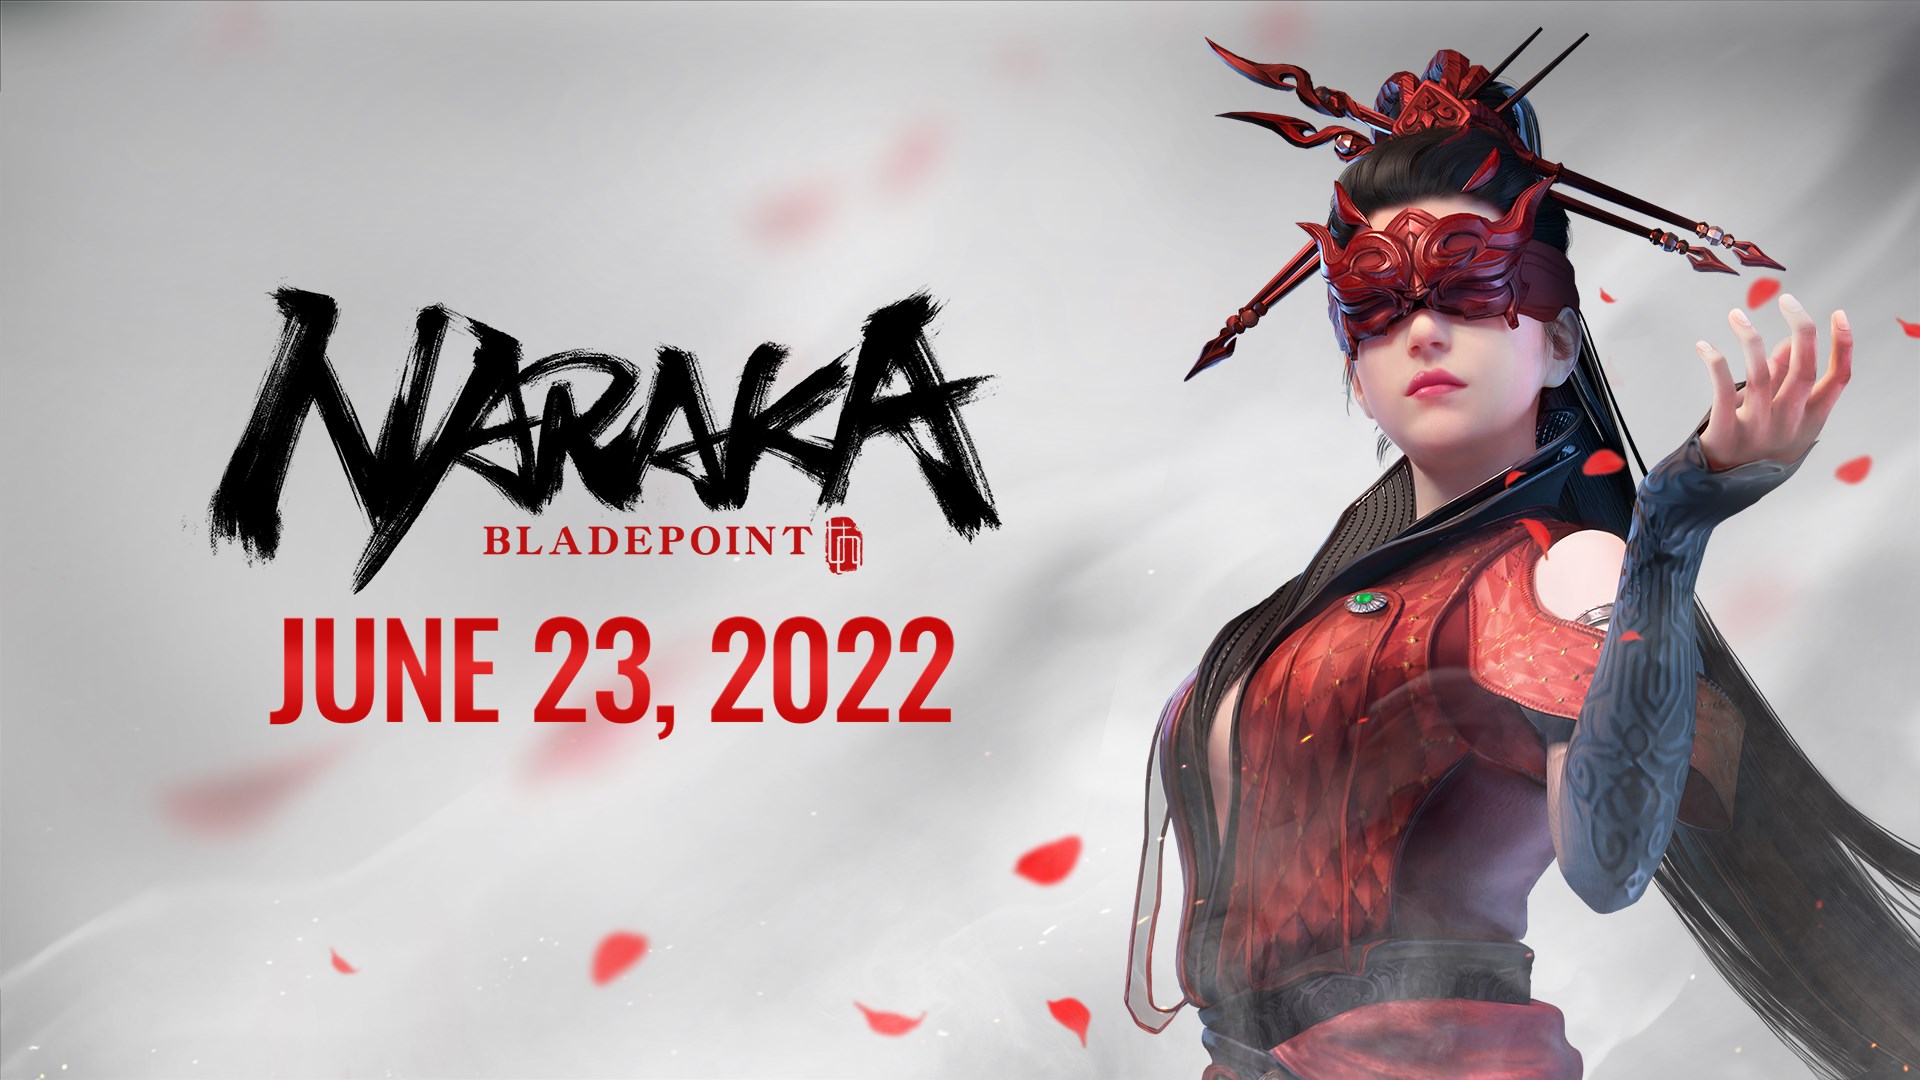 Video For NARAKA: BLADEPOINT Is Available For Digital Pre-order And Pre-download On PC And Xbox Series X|S (Game Pass)